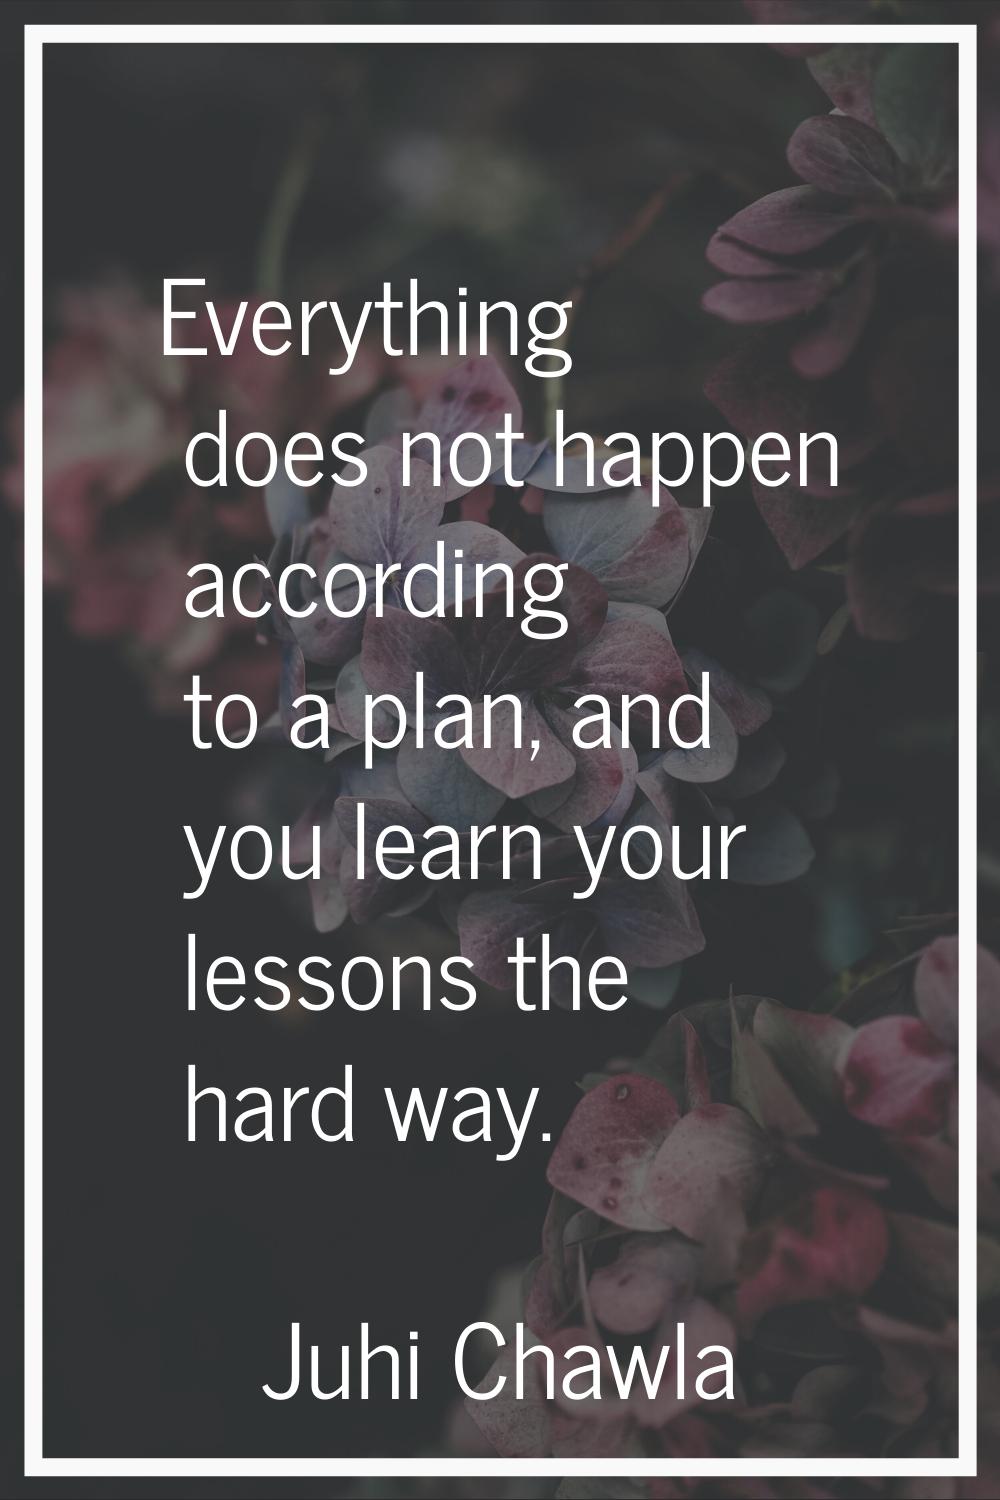 Everything does not happen according to a plan, and you learn your lessons the hard way.